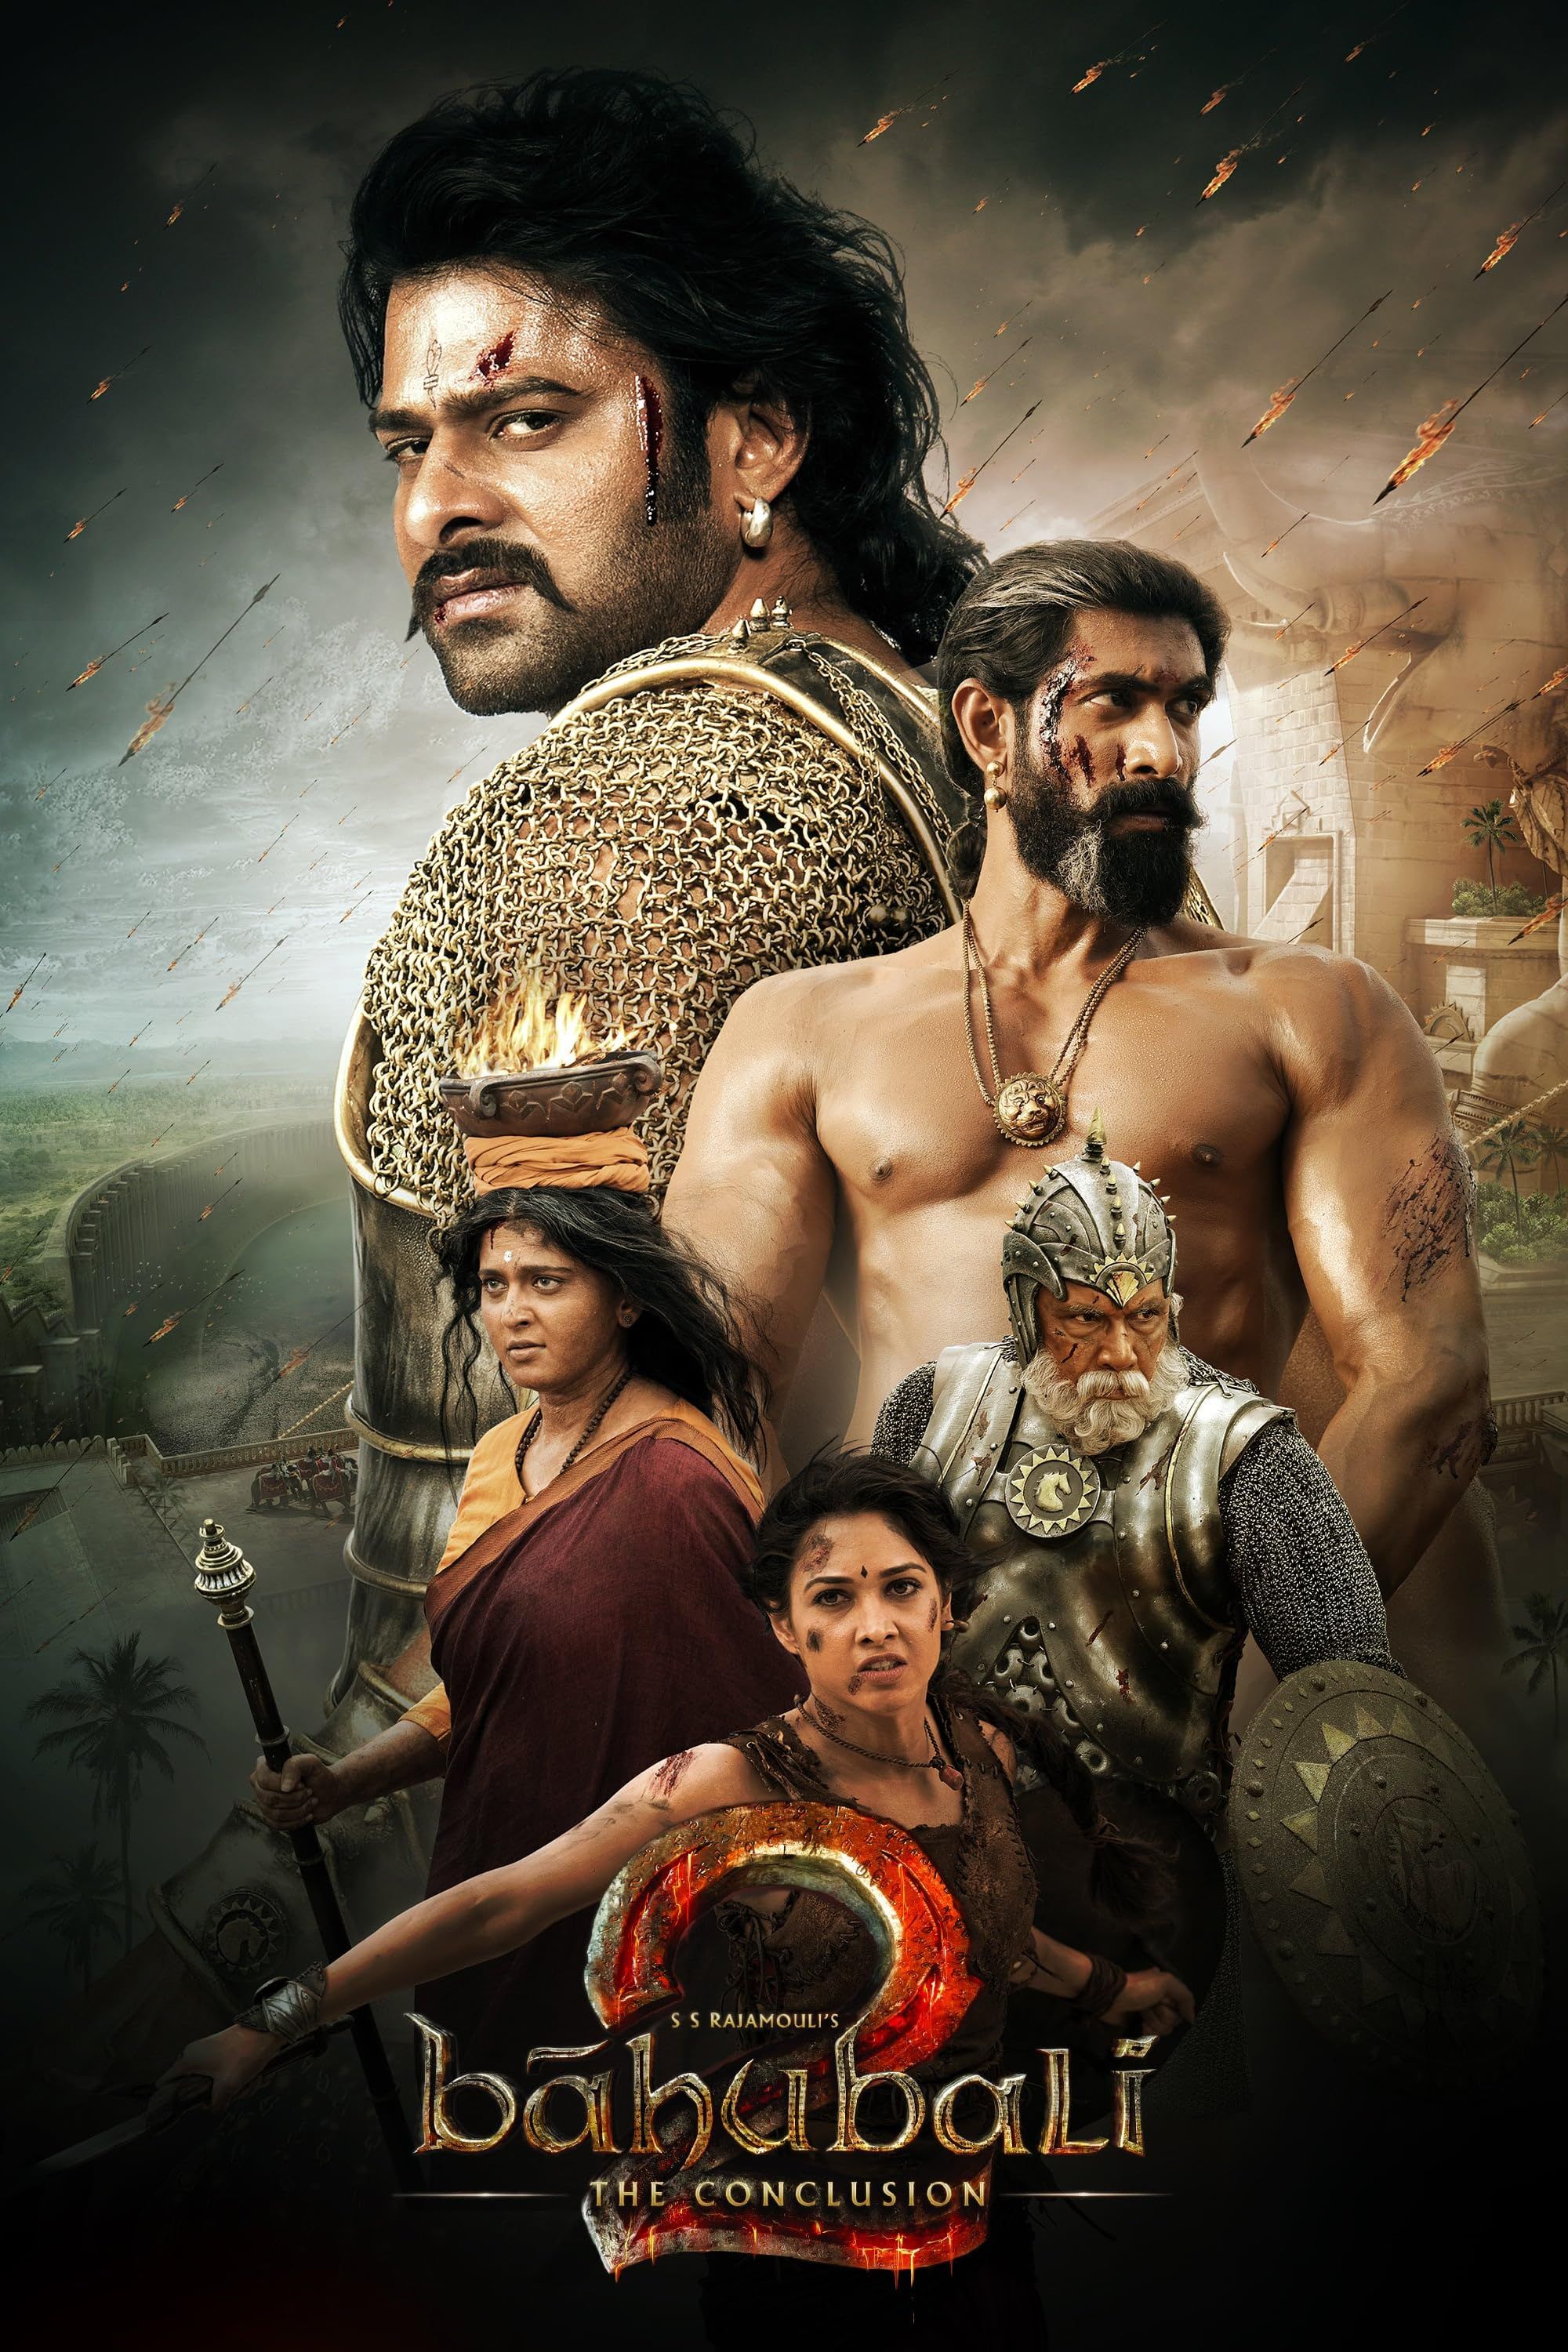 Baahubali 2 The Conclusion (2017) Hindi Dubbed Movie download full movie